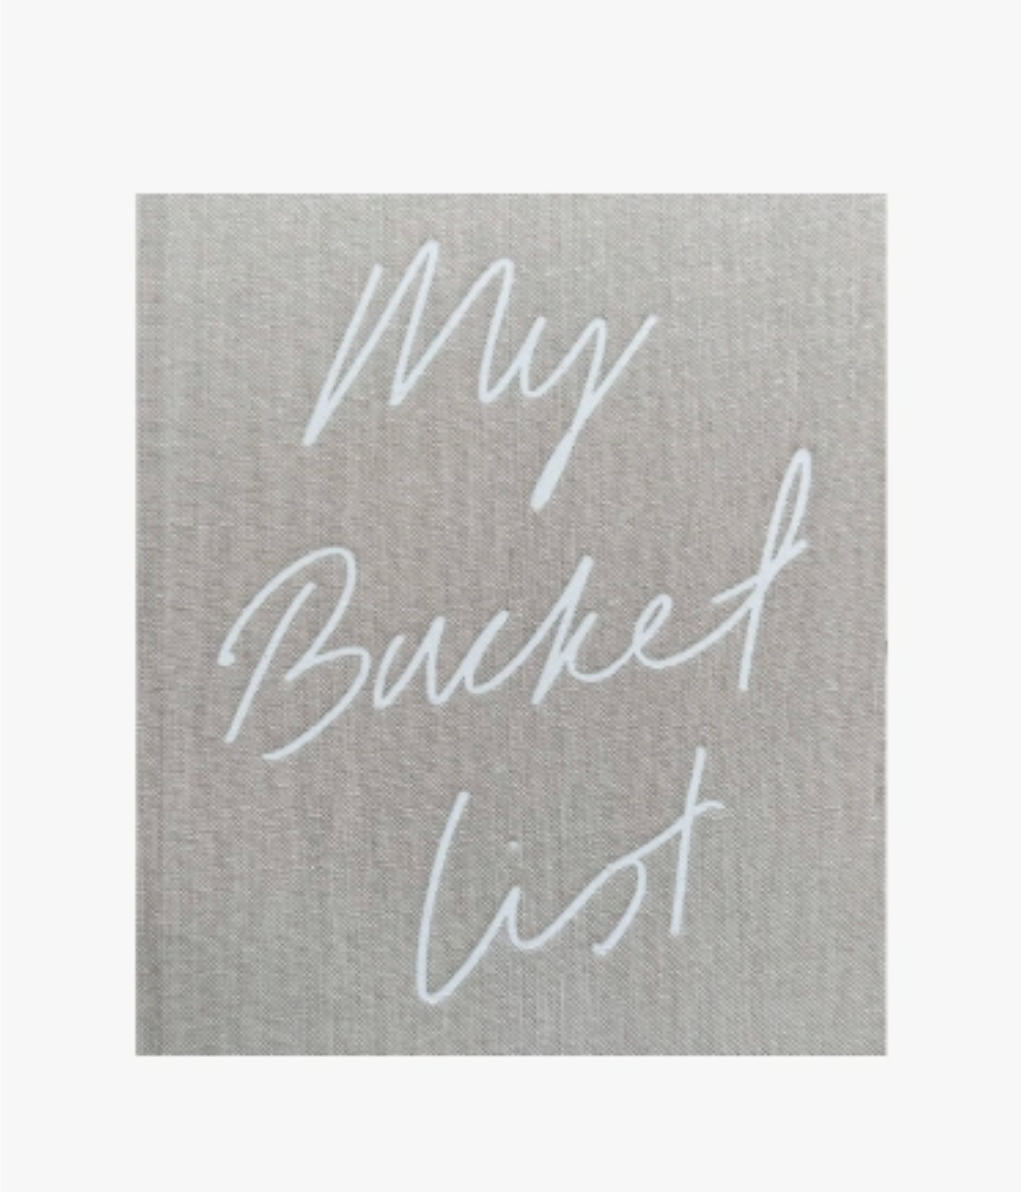 Bucket List Journal by Axel and Ash